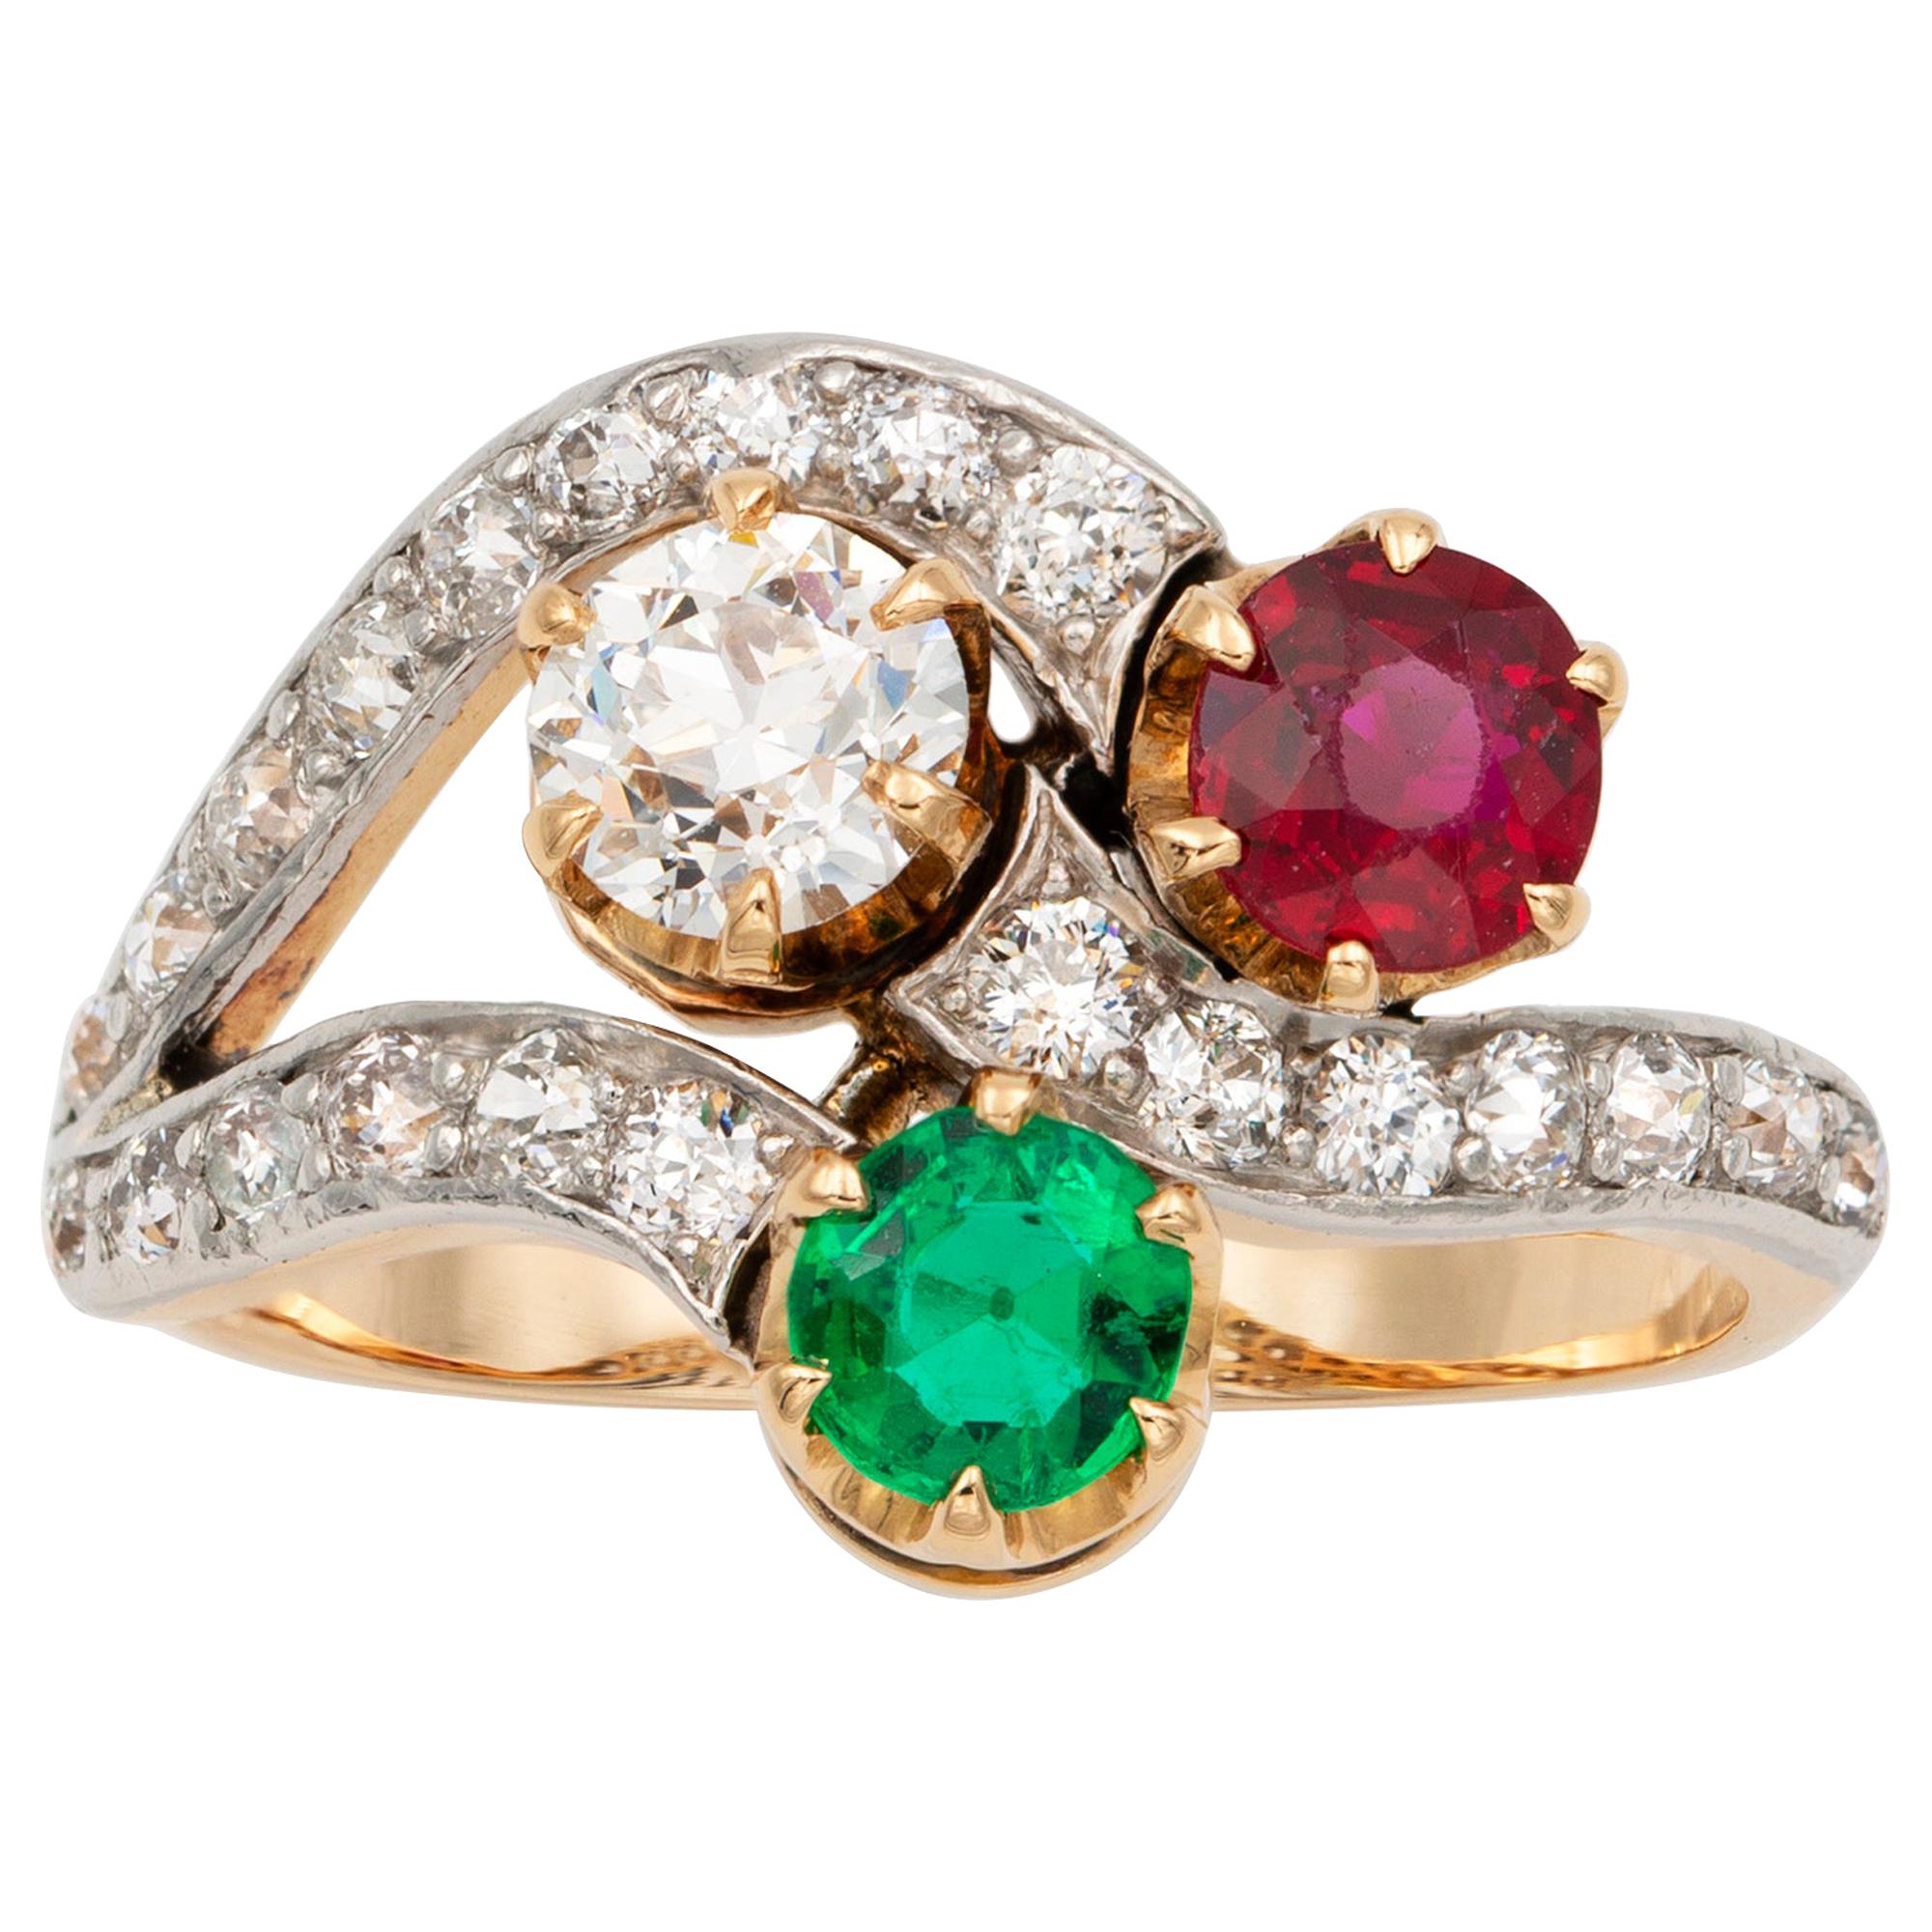 Early 20th Century Emerald, Ruby and Diamond Ring